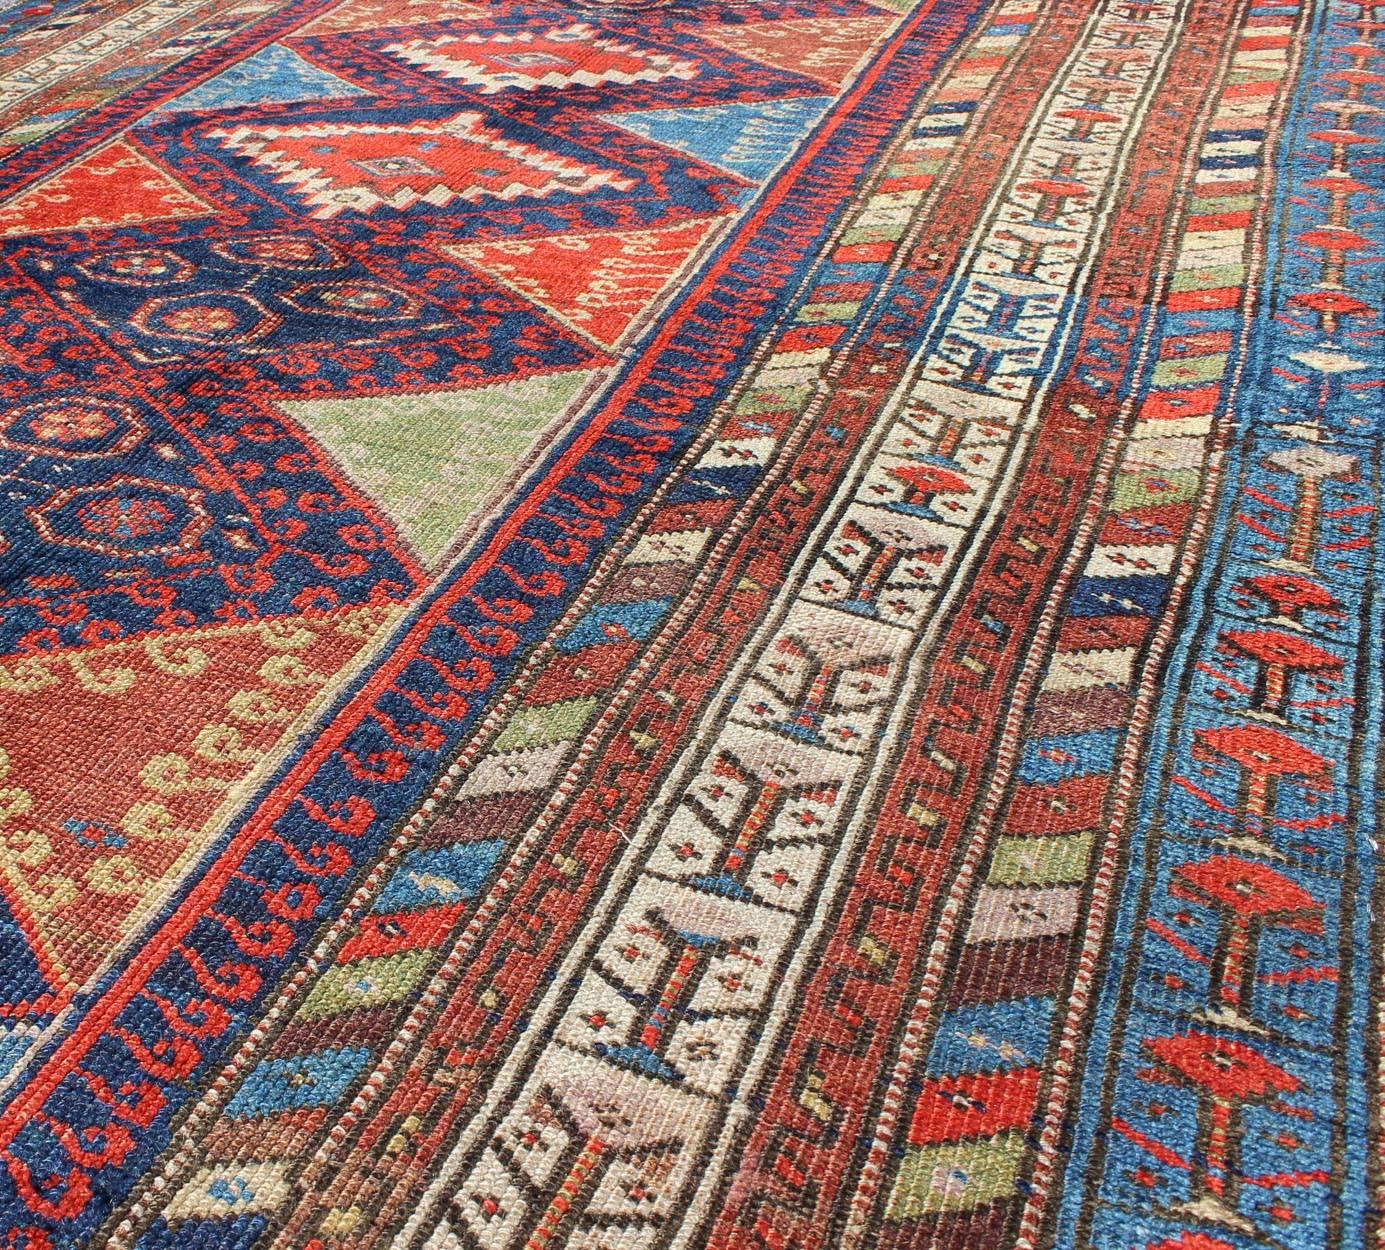 Antique Kurdish Kazak with Tribal and Geometric Motifs In Blue, red & Green In Good Condition For Sale In Atlanta, GA